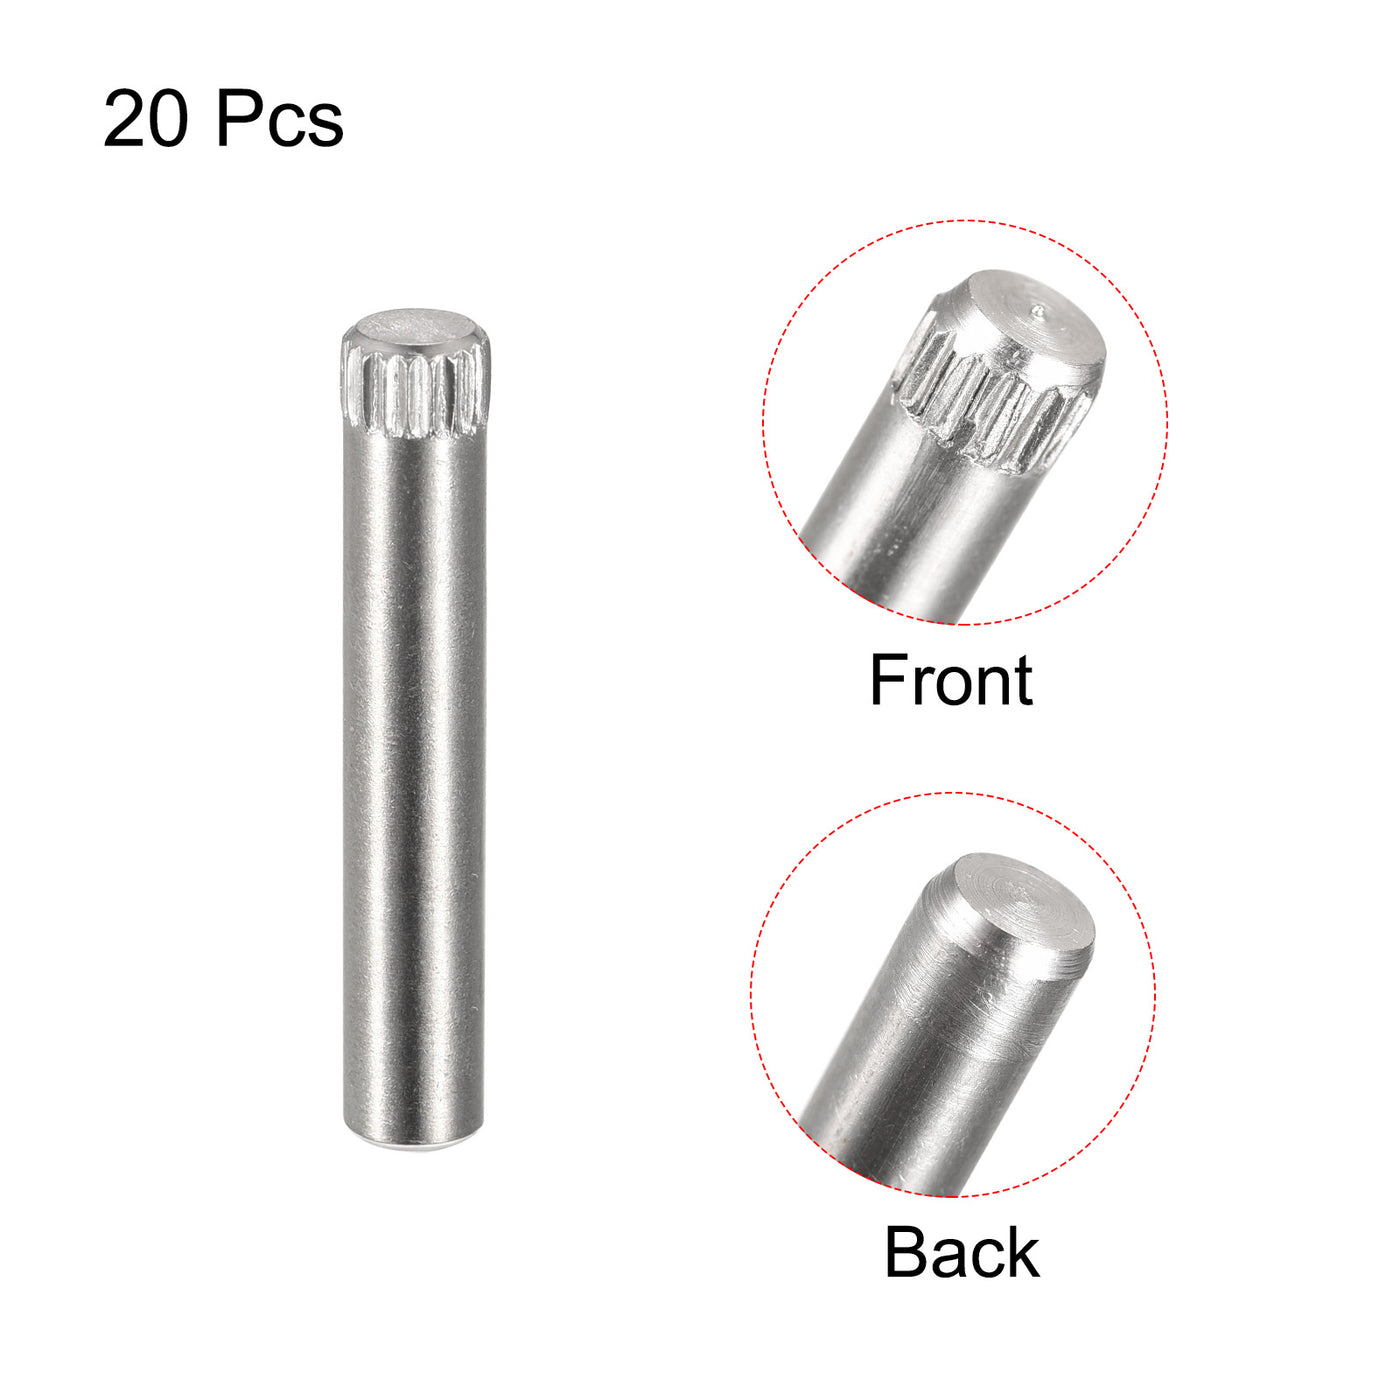 uxcell Uxcell 5x30mm 304 Stainless Steel Dowel Pins, 20Pcs Knurled Head Flat End Dowel Pin